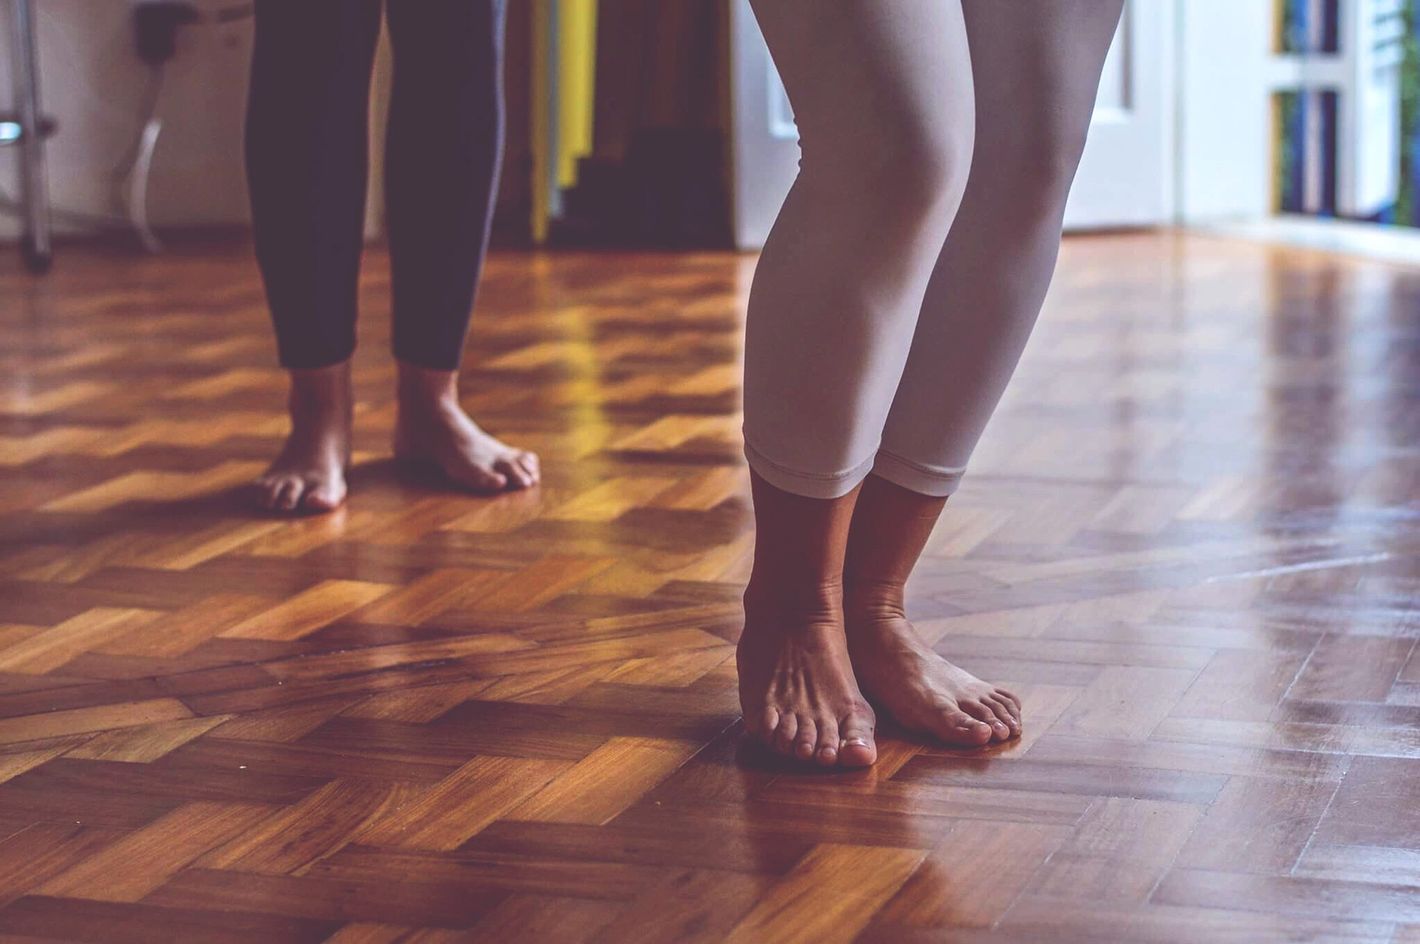 Yoga Forced Hot Sex - Yoga Pants Are a Force for Body Positivity